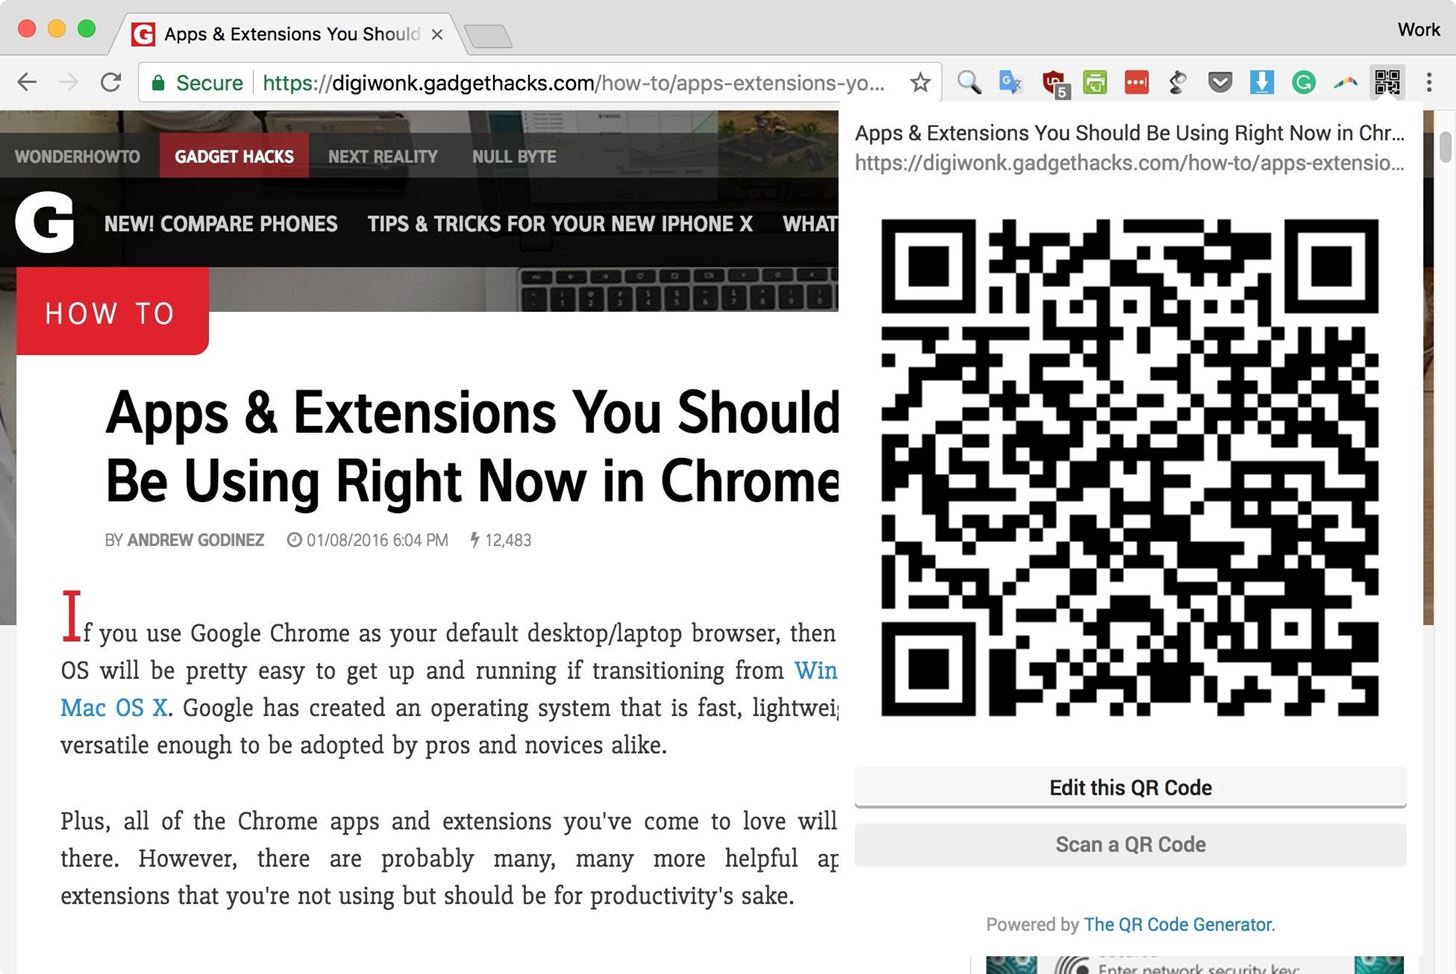 The Easy Way to Get Your Chrome Desktop Tabs in Your iPhone's Safari Browser